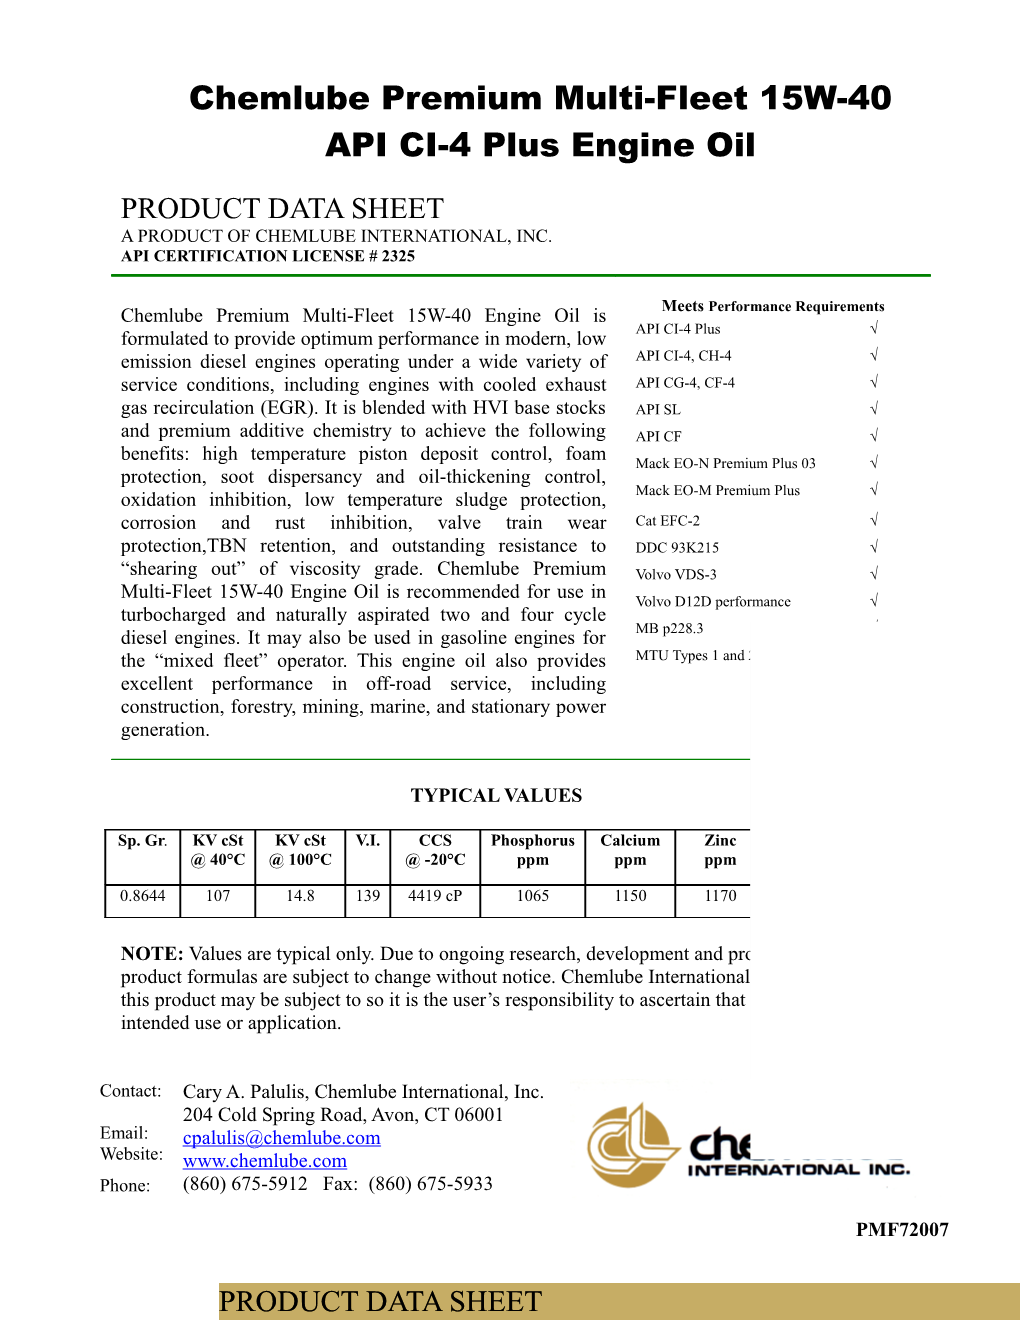 Product Data Sheet s1